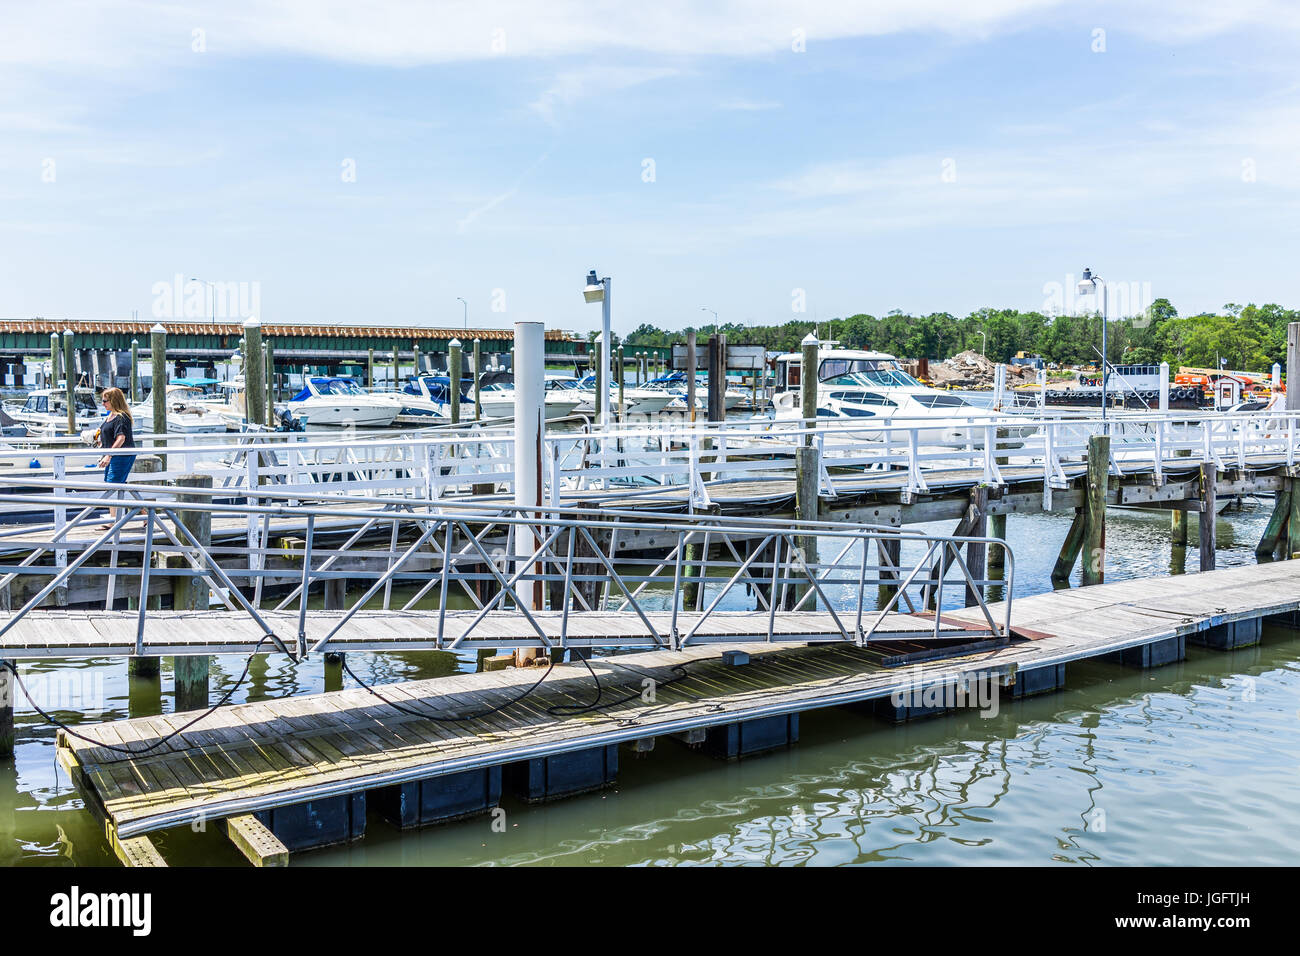 Bronx, USA - June 11, 2017: City Island harbor with boats and reflection Stock Photo